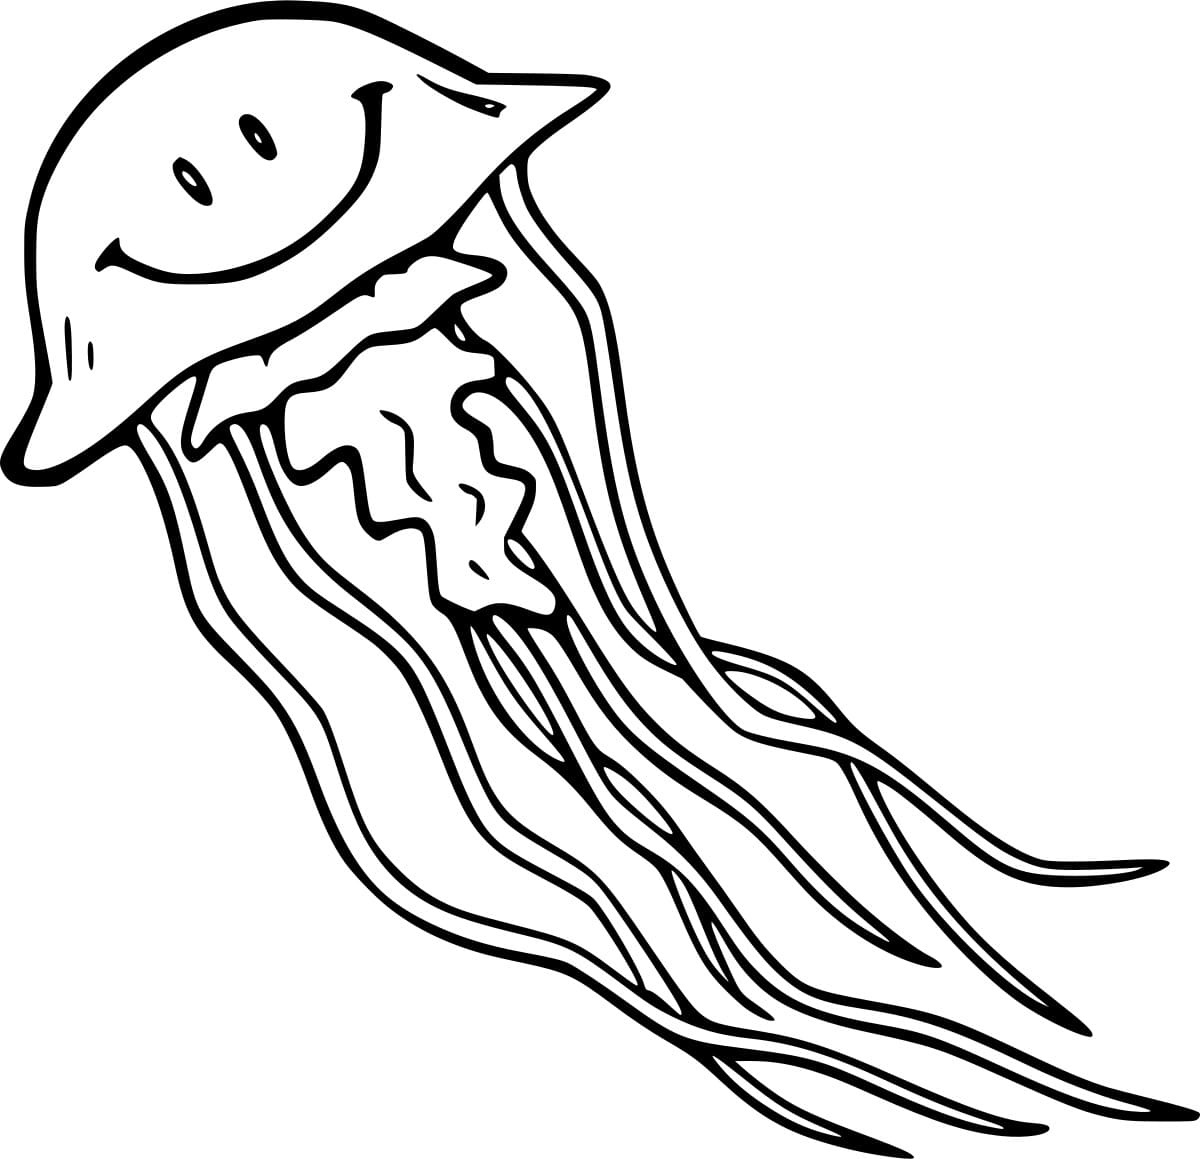 Blue Fire Jellyfish Coloring Page